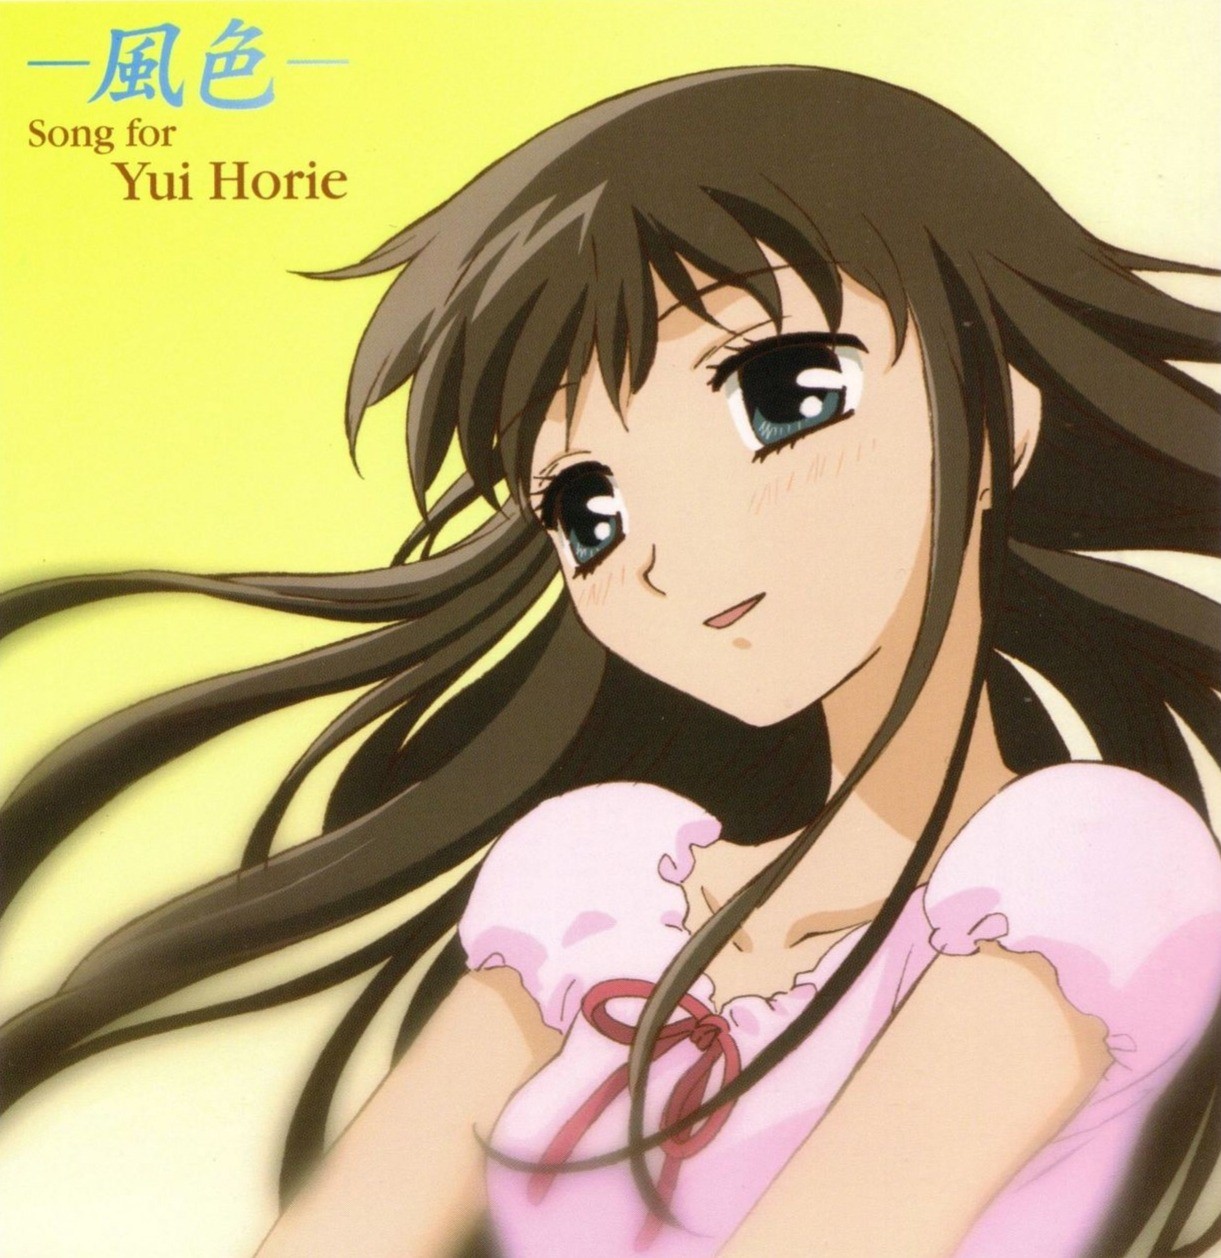 Song for Yui Horie | Fruits Basket Wiki | Fandom